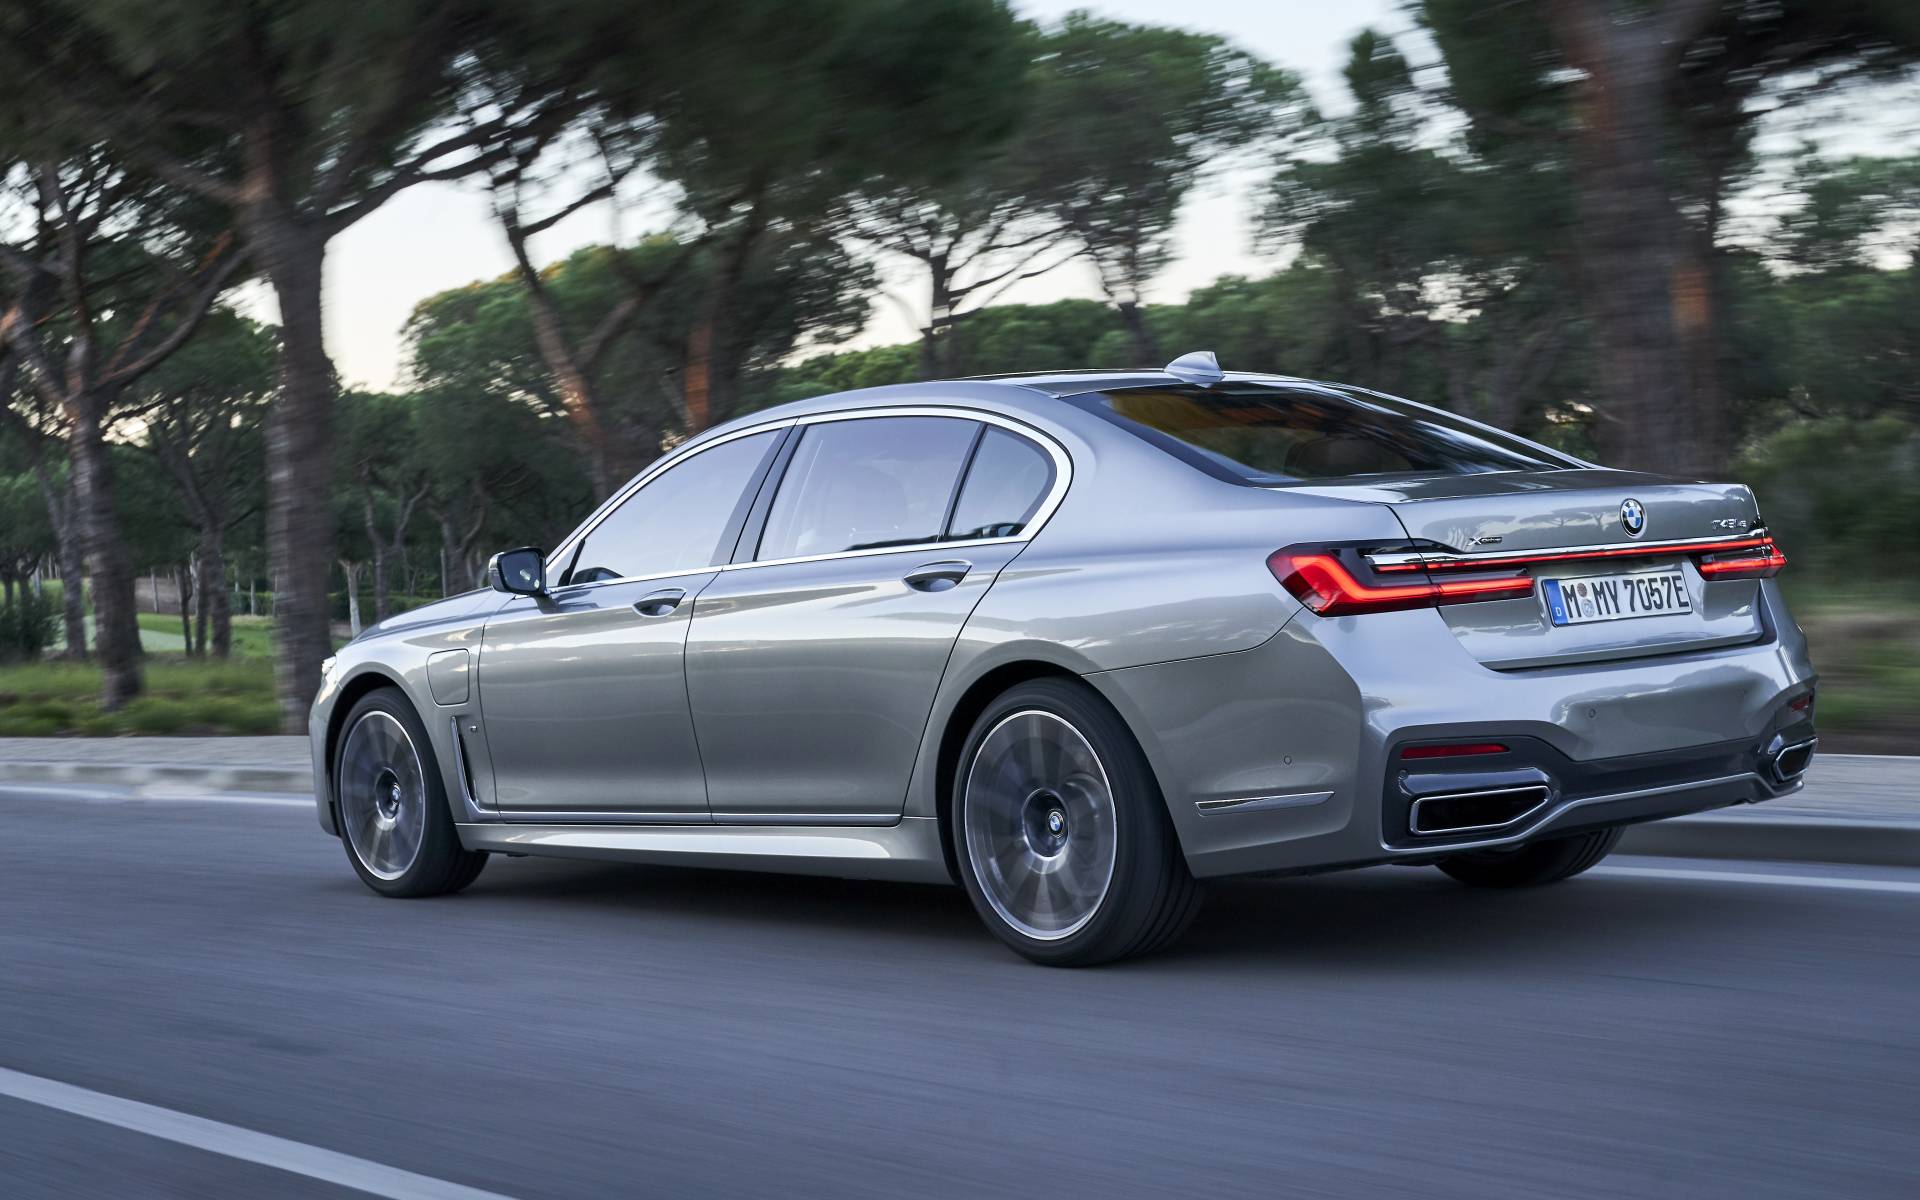 The Luxury Of A 2020 BMW 7 Series: Unparalleled Excellence